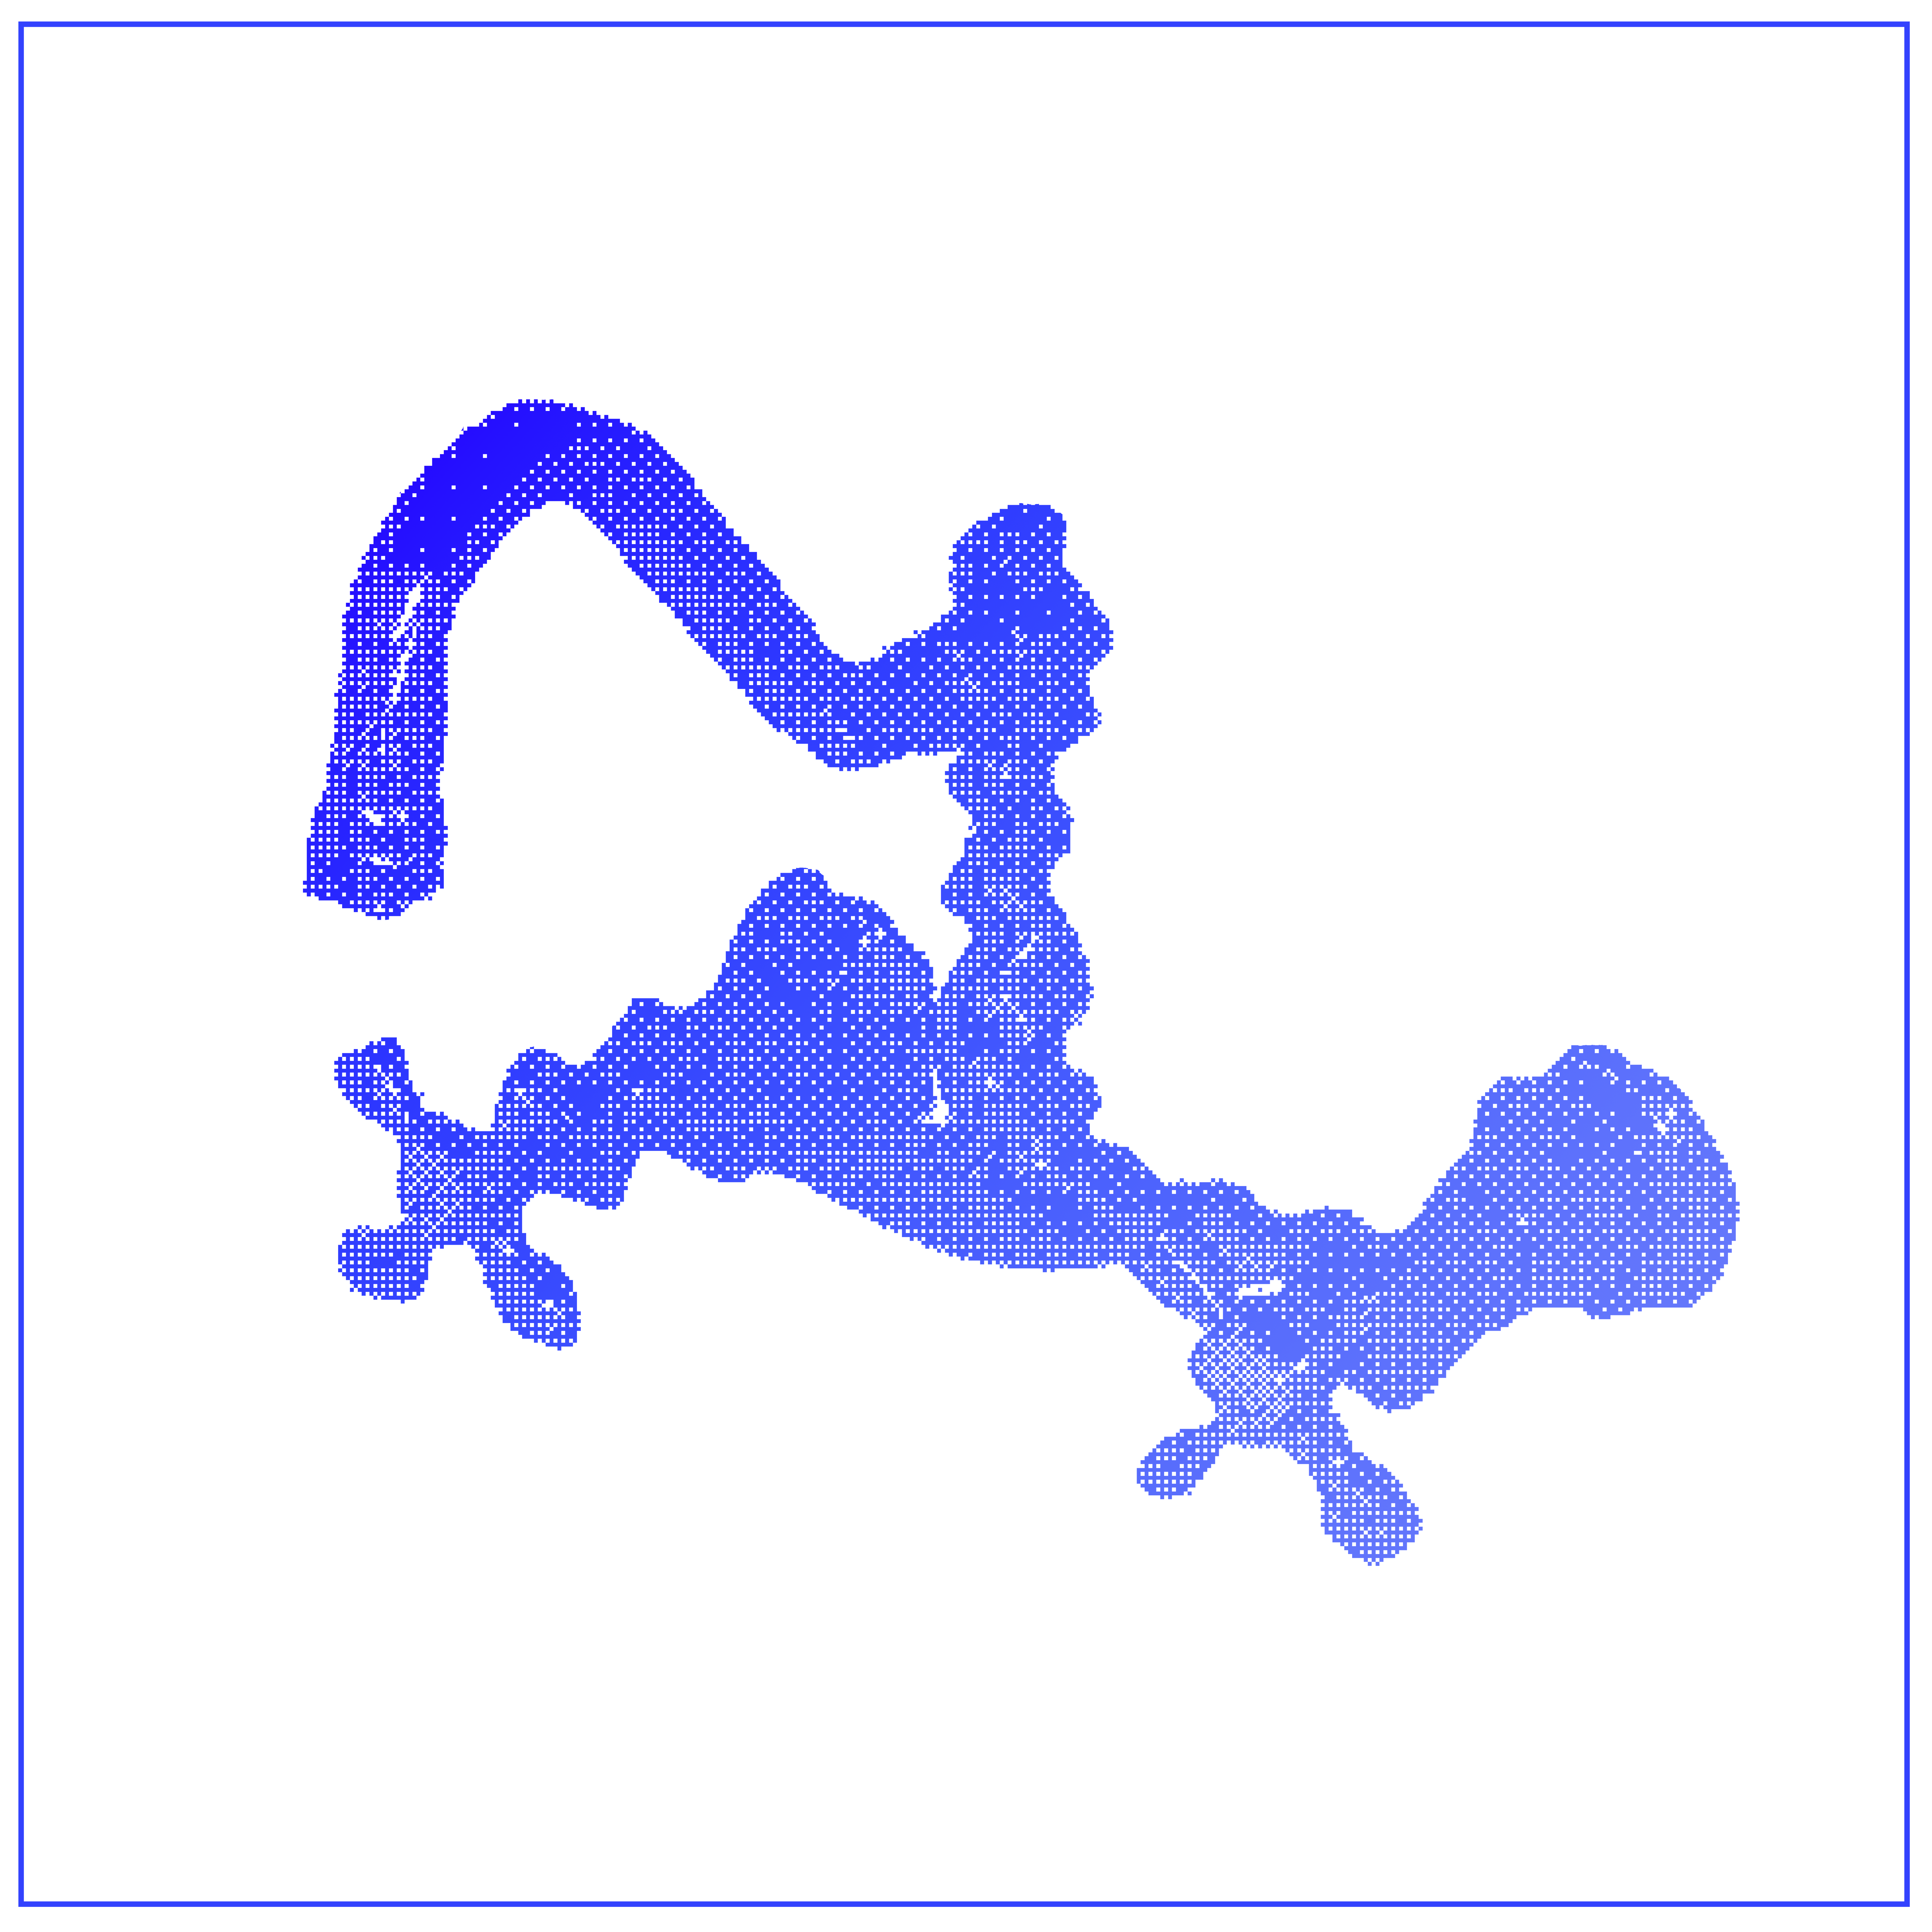 Bright blue print of kitchen faucet with two spigots on white background.